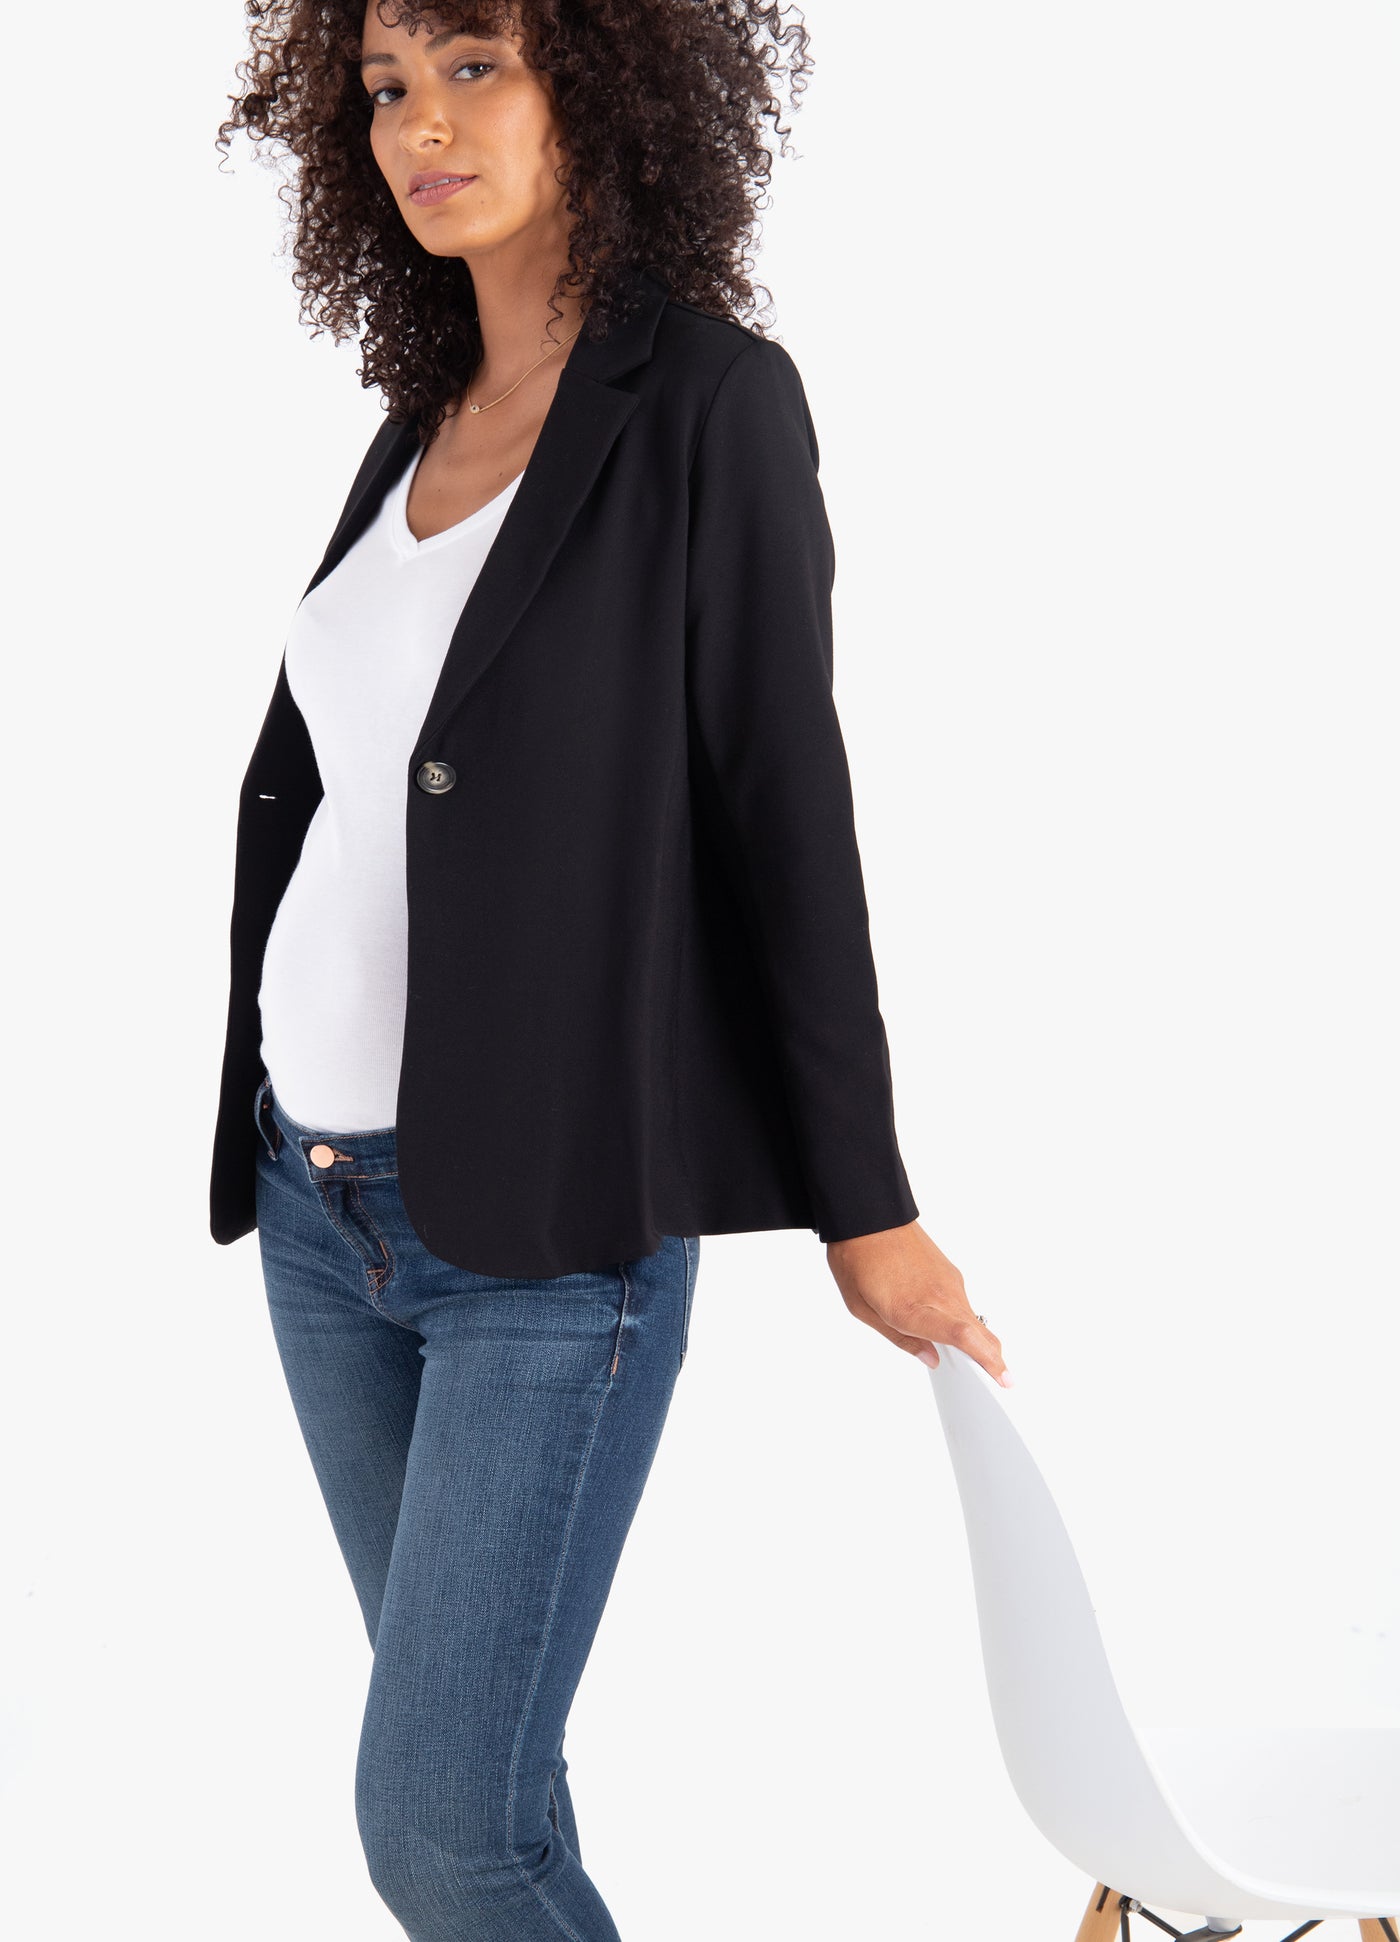 Model is 5’10”, 4 months pregnant, and wears size S.||Jet Black::hover